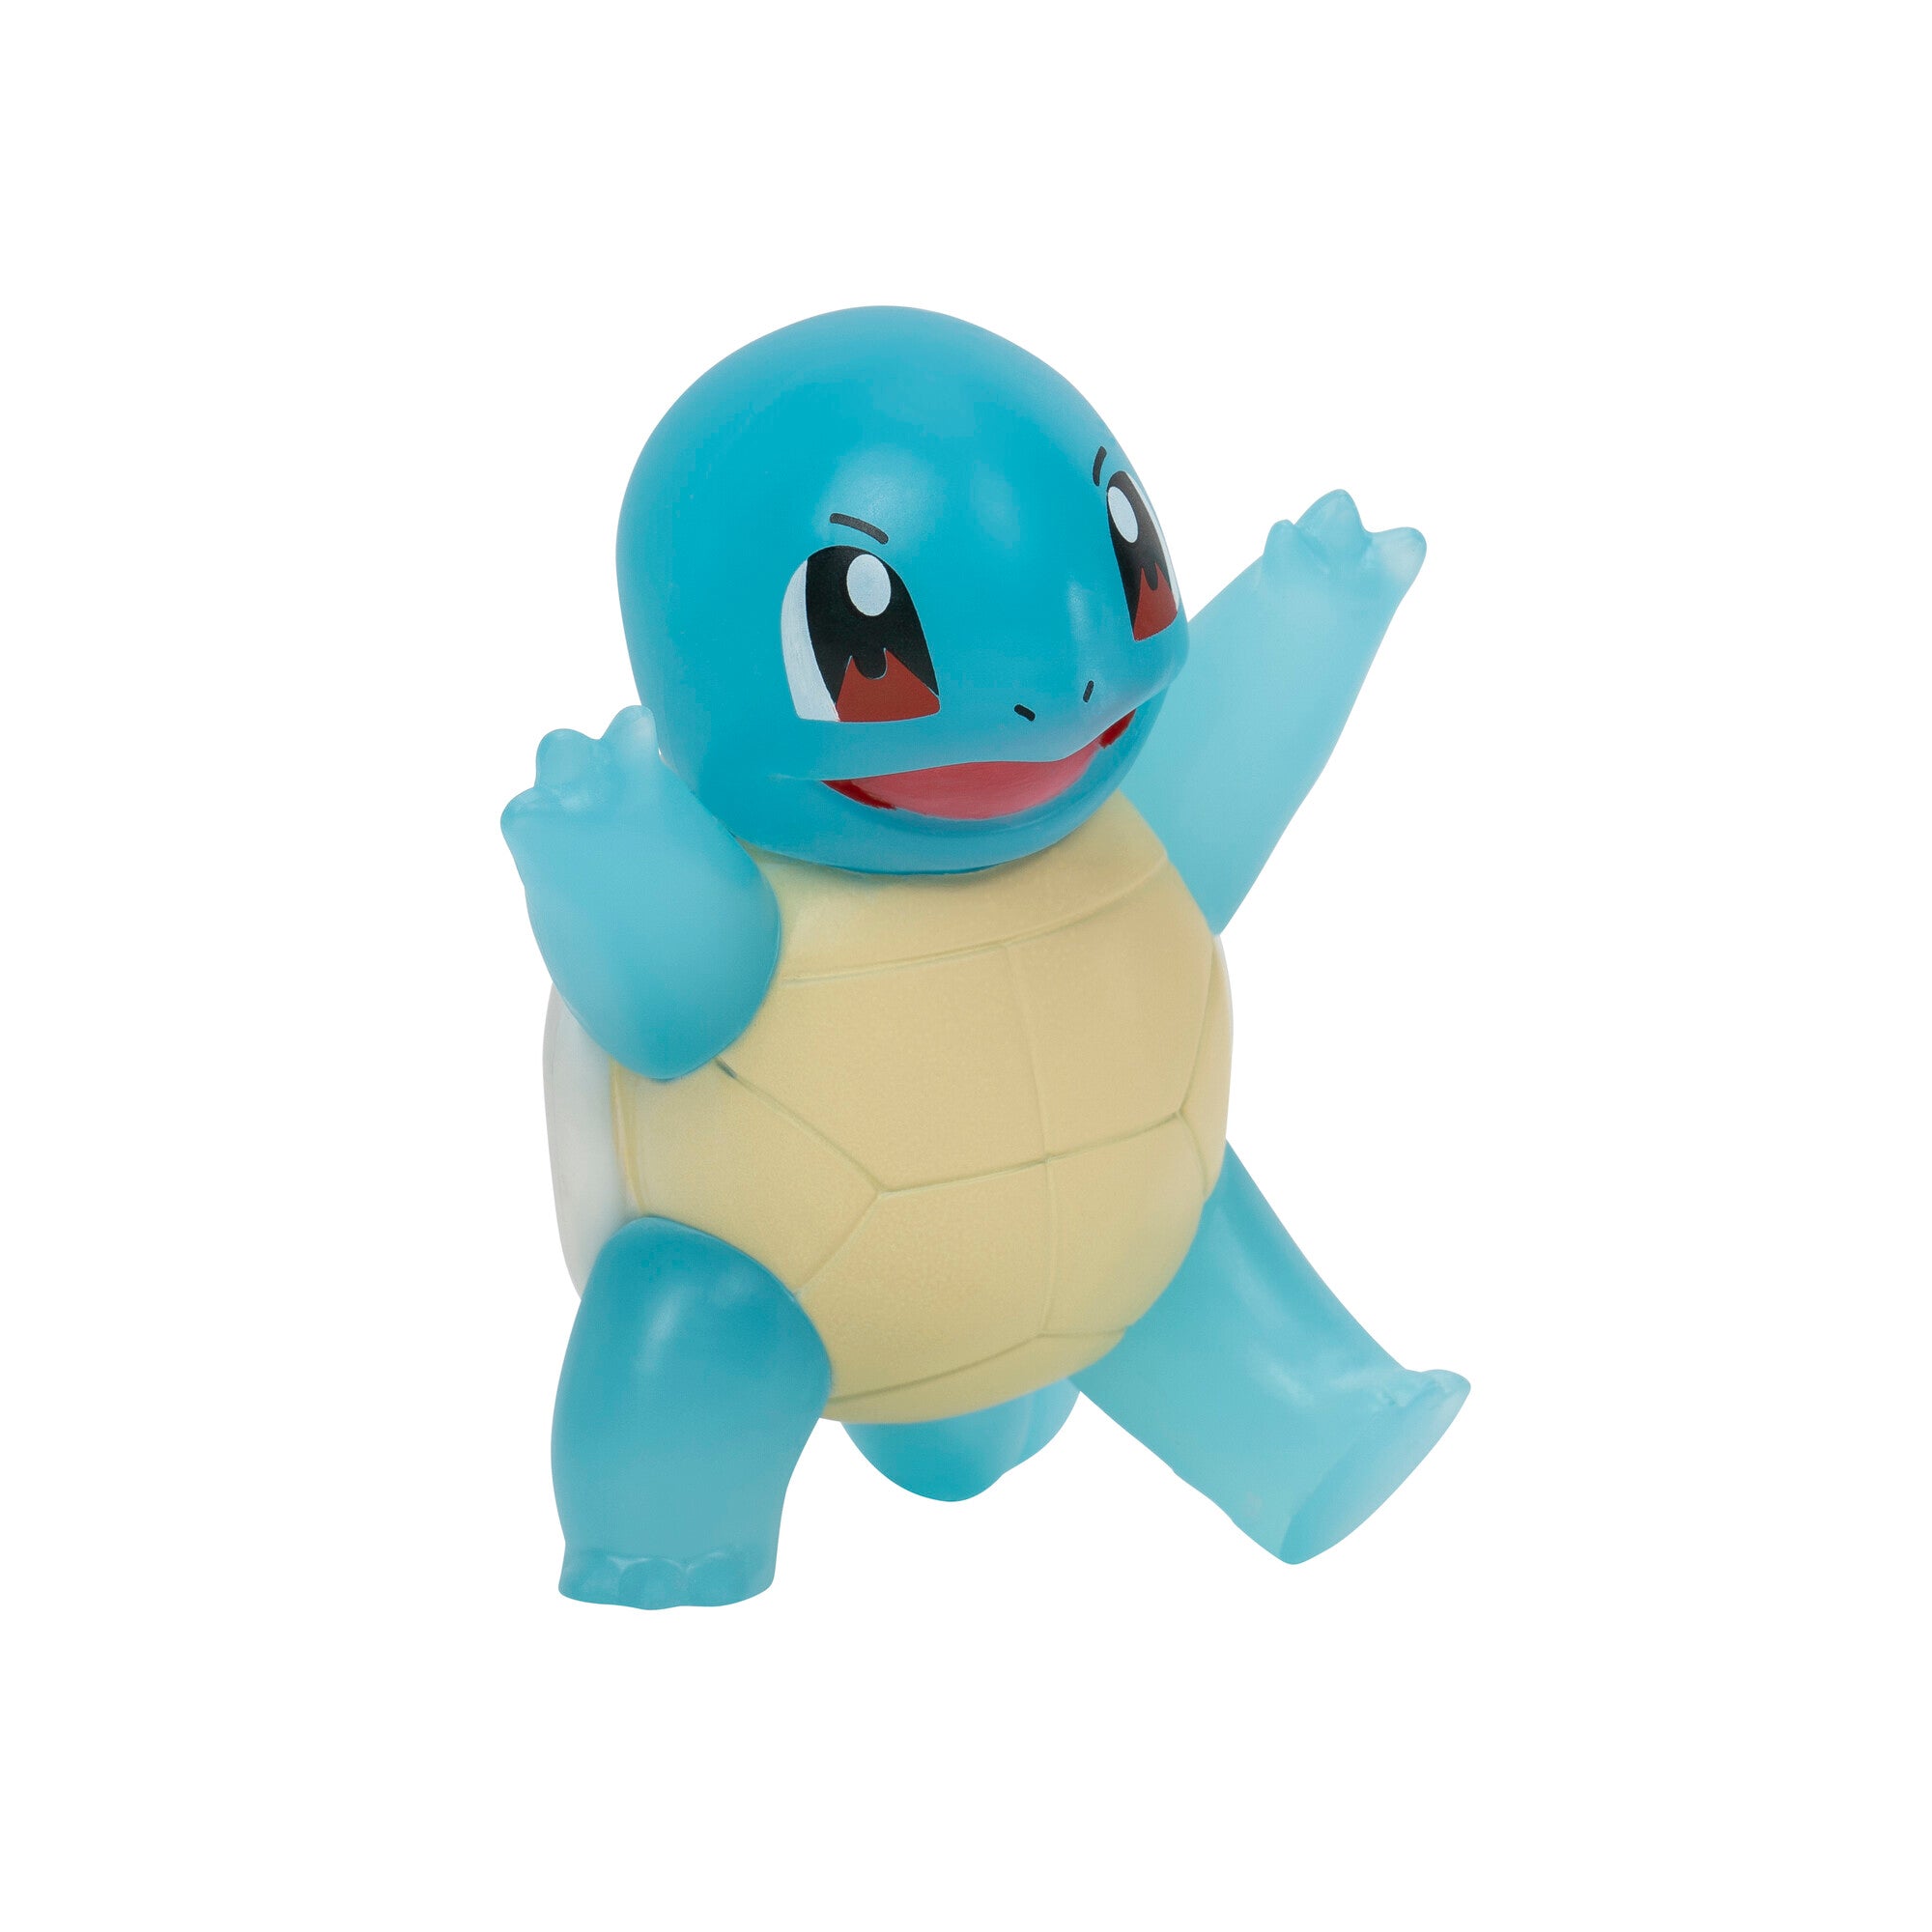 Pokemon Select 3" Battle Figure - Squirtle | North of Exile Games